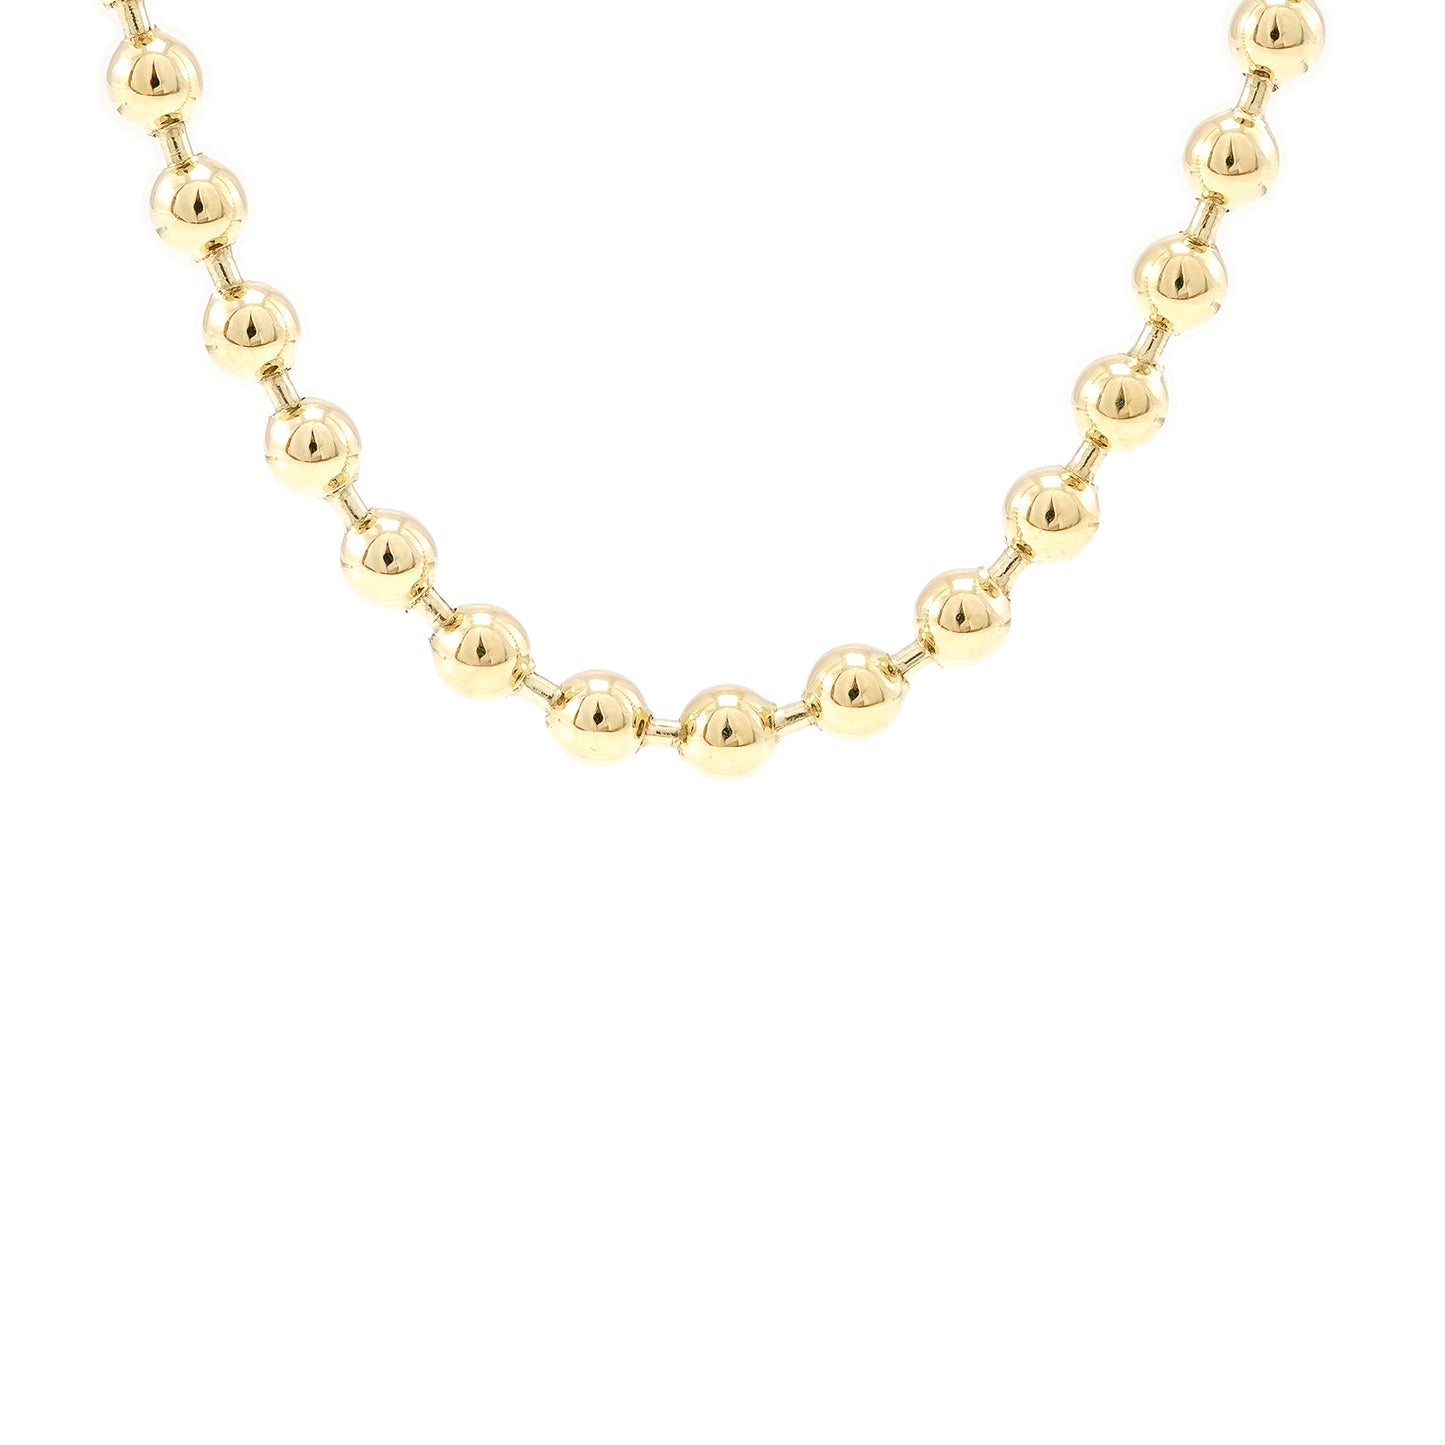 Ball chain yellow gold 585 14K 91cm extra long gold jewelry necklace ball necklace